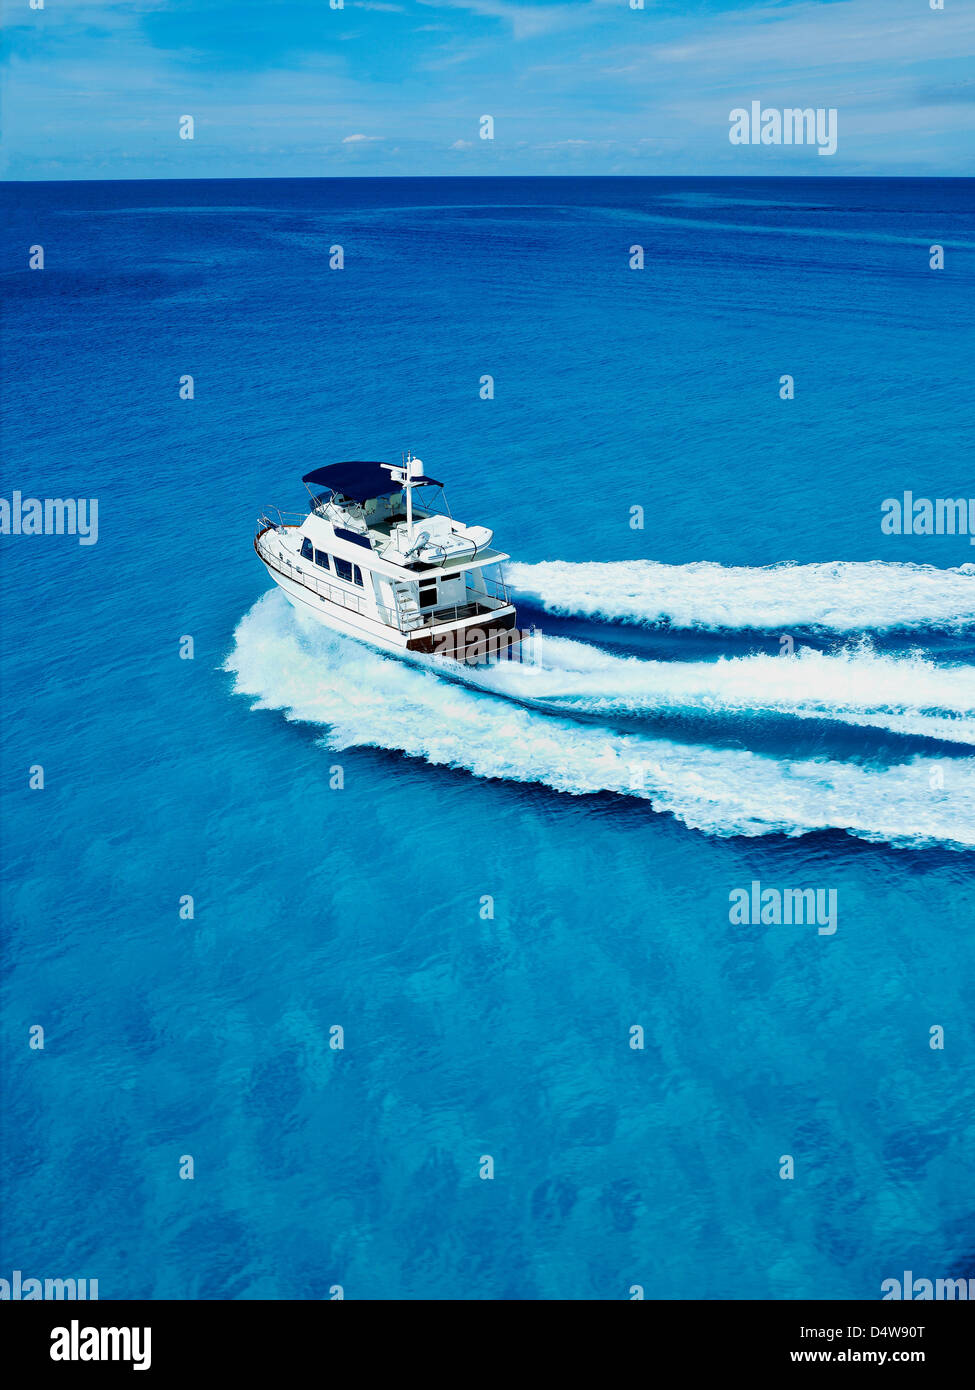 Boat sailing in tropical water Stock Photo